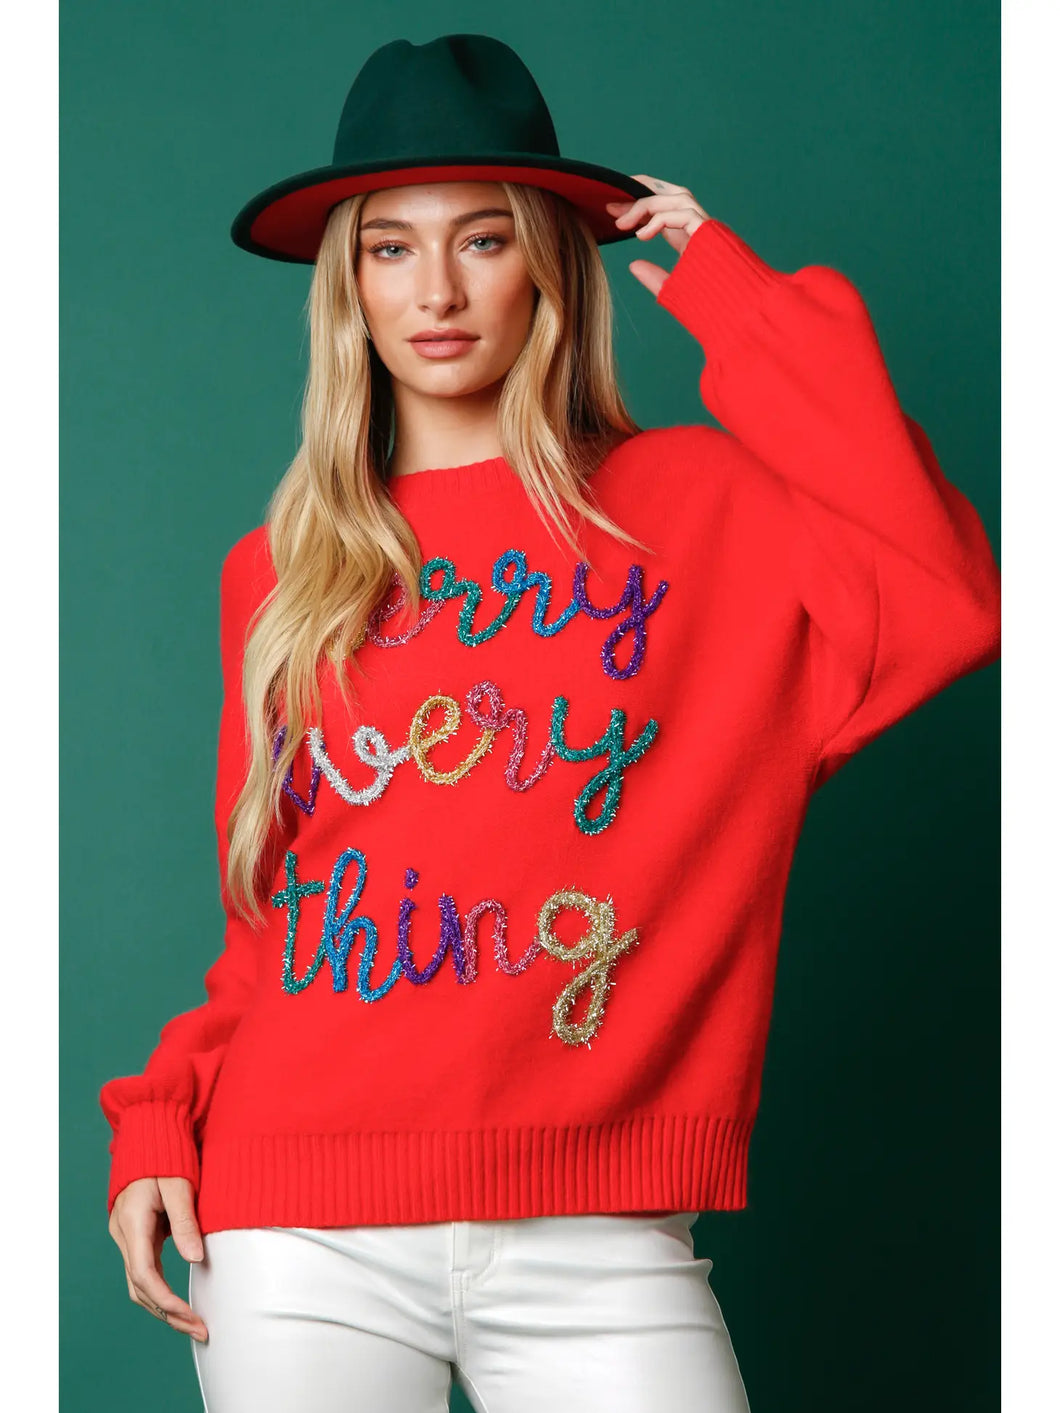 Merry everything sweater